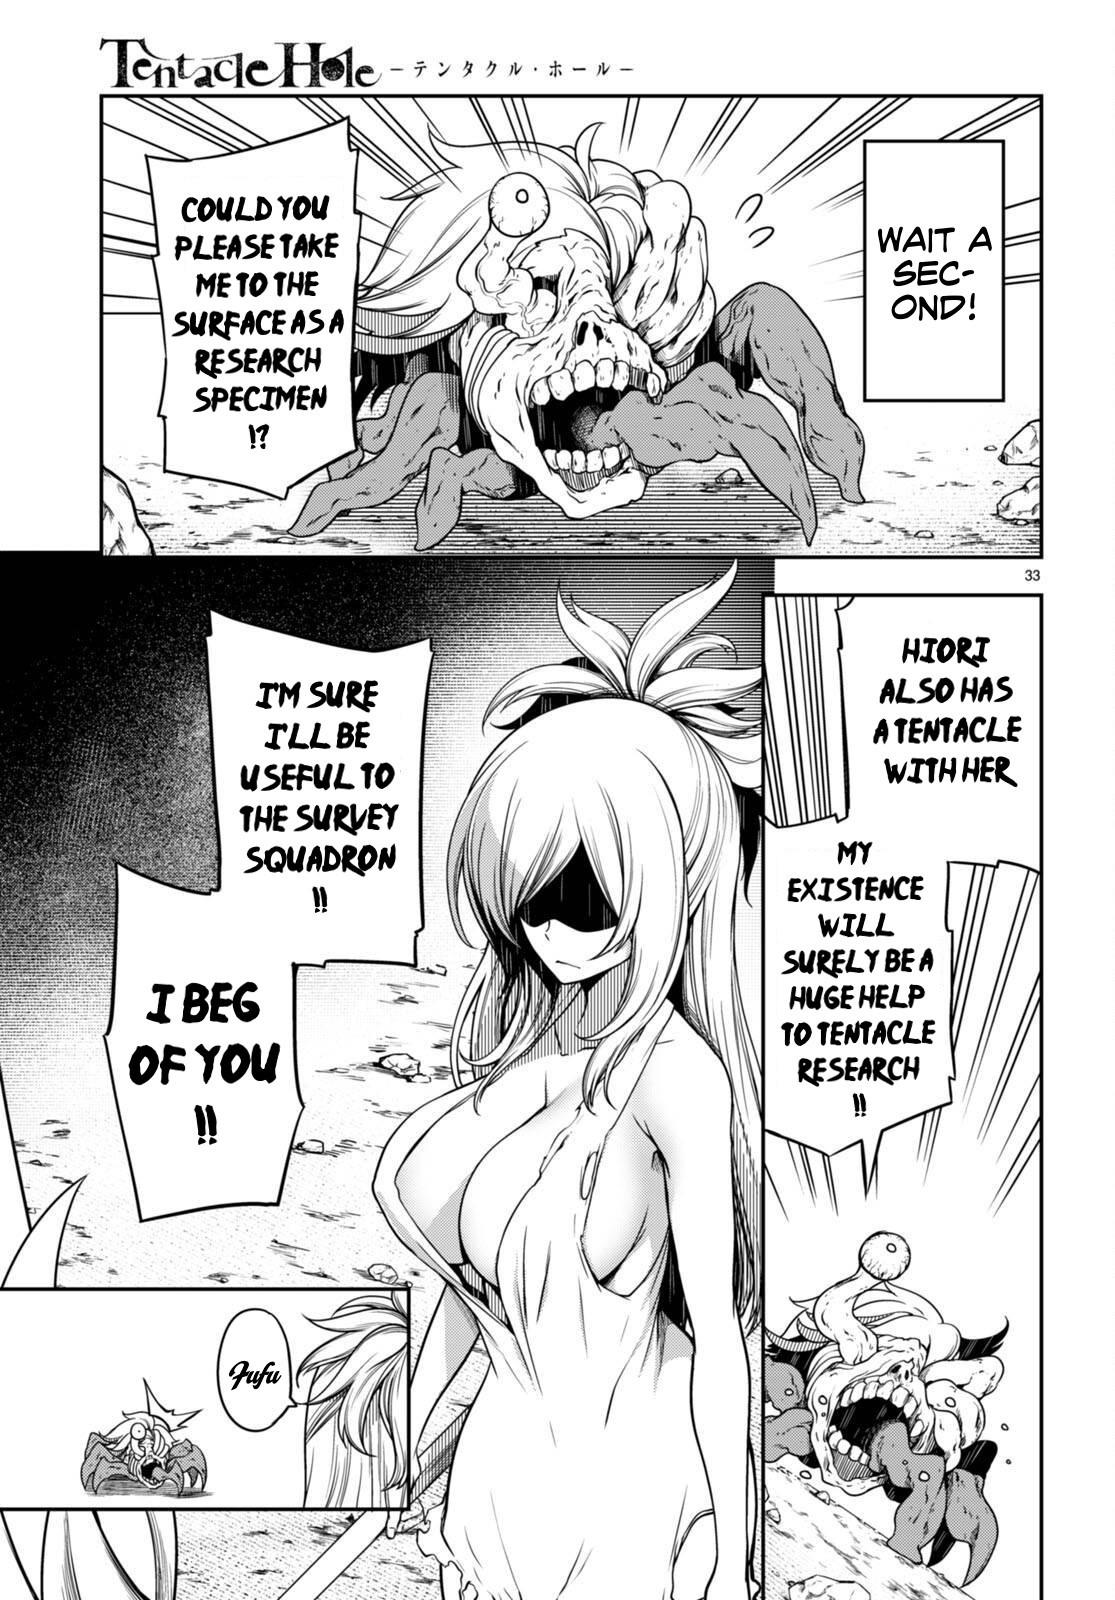 Tentacle Hole Chapter 13 33